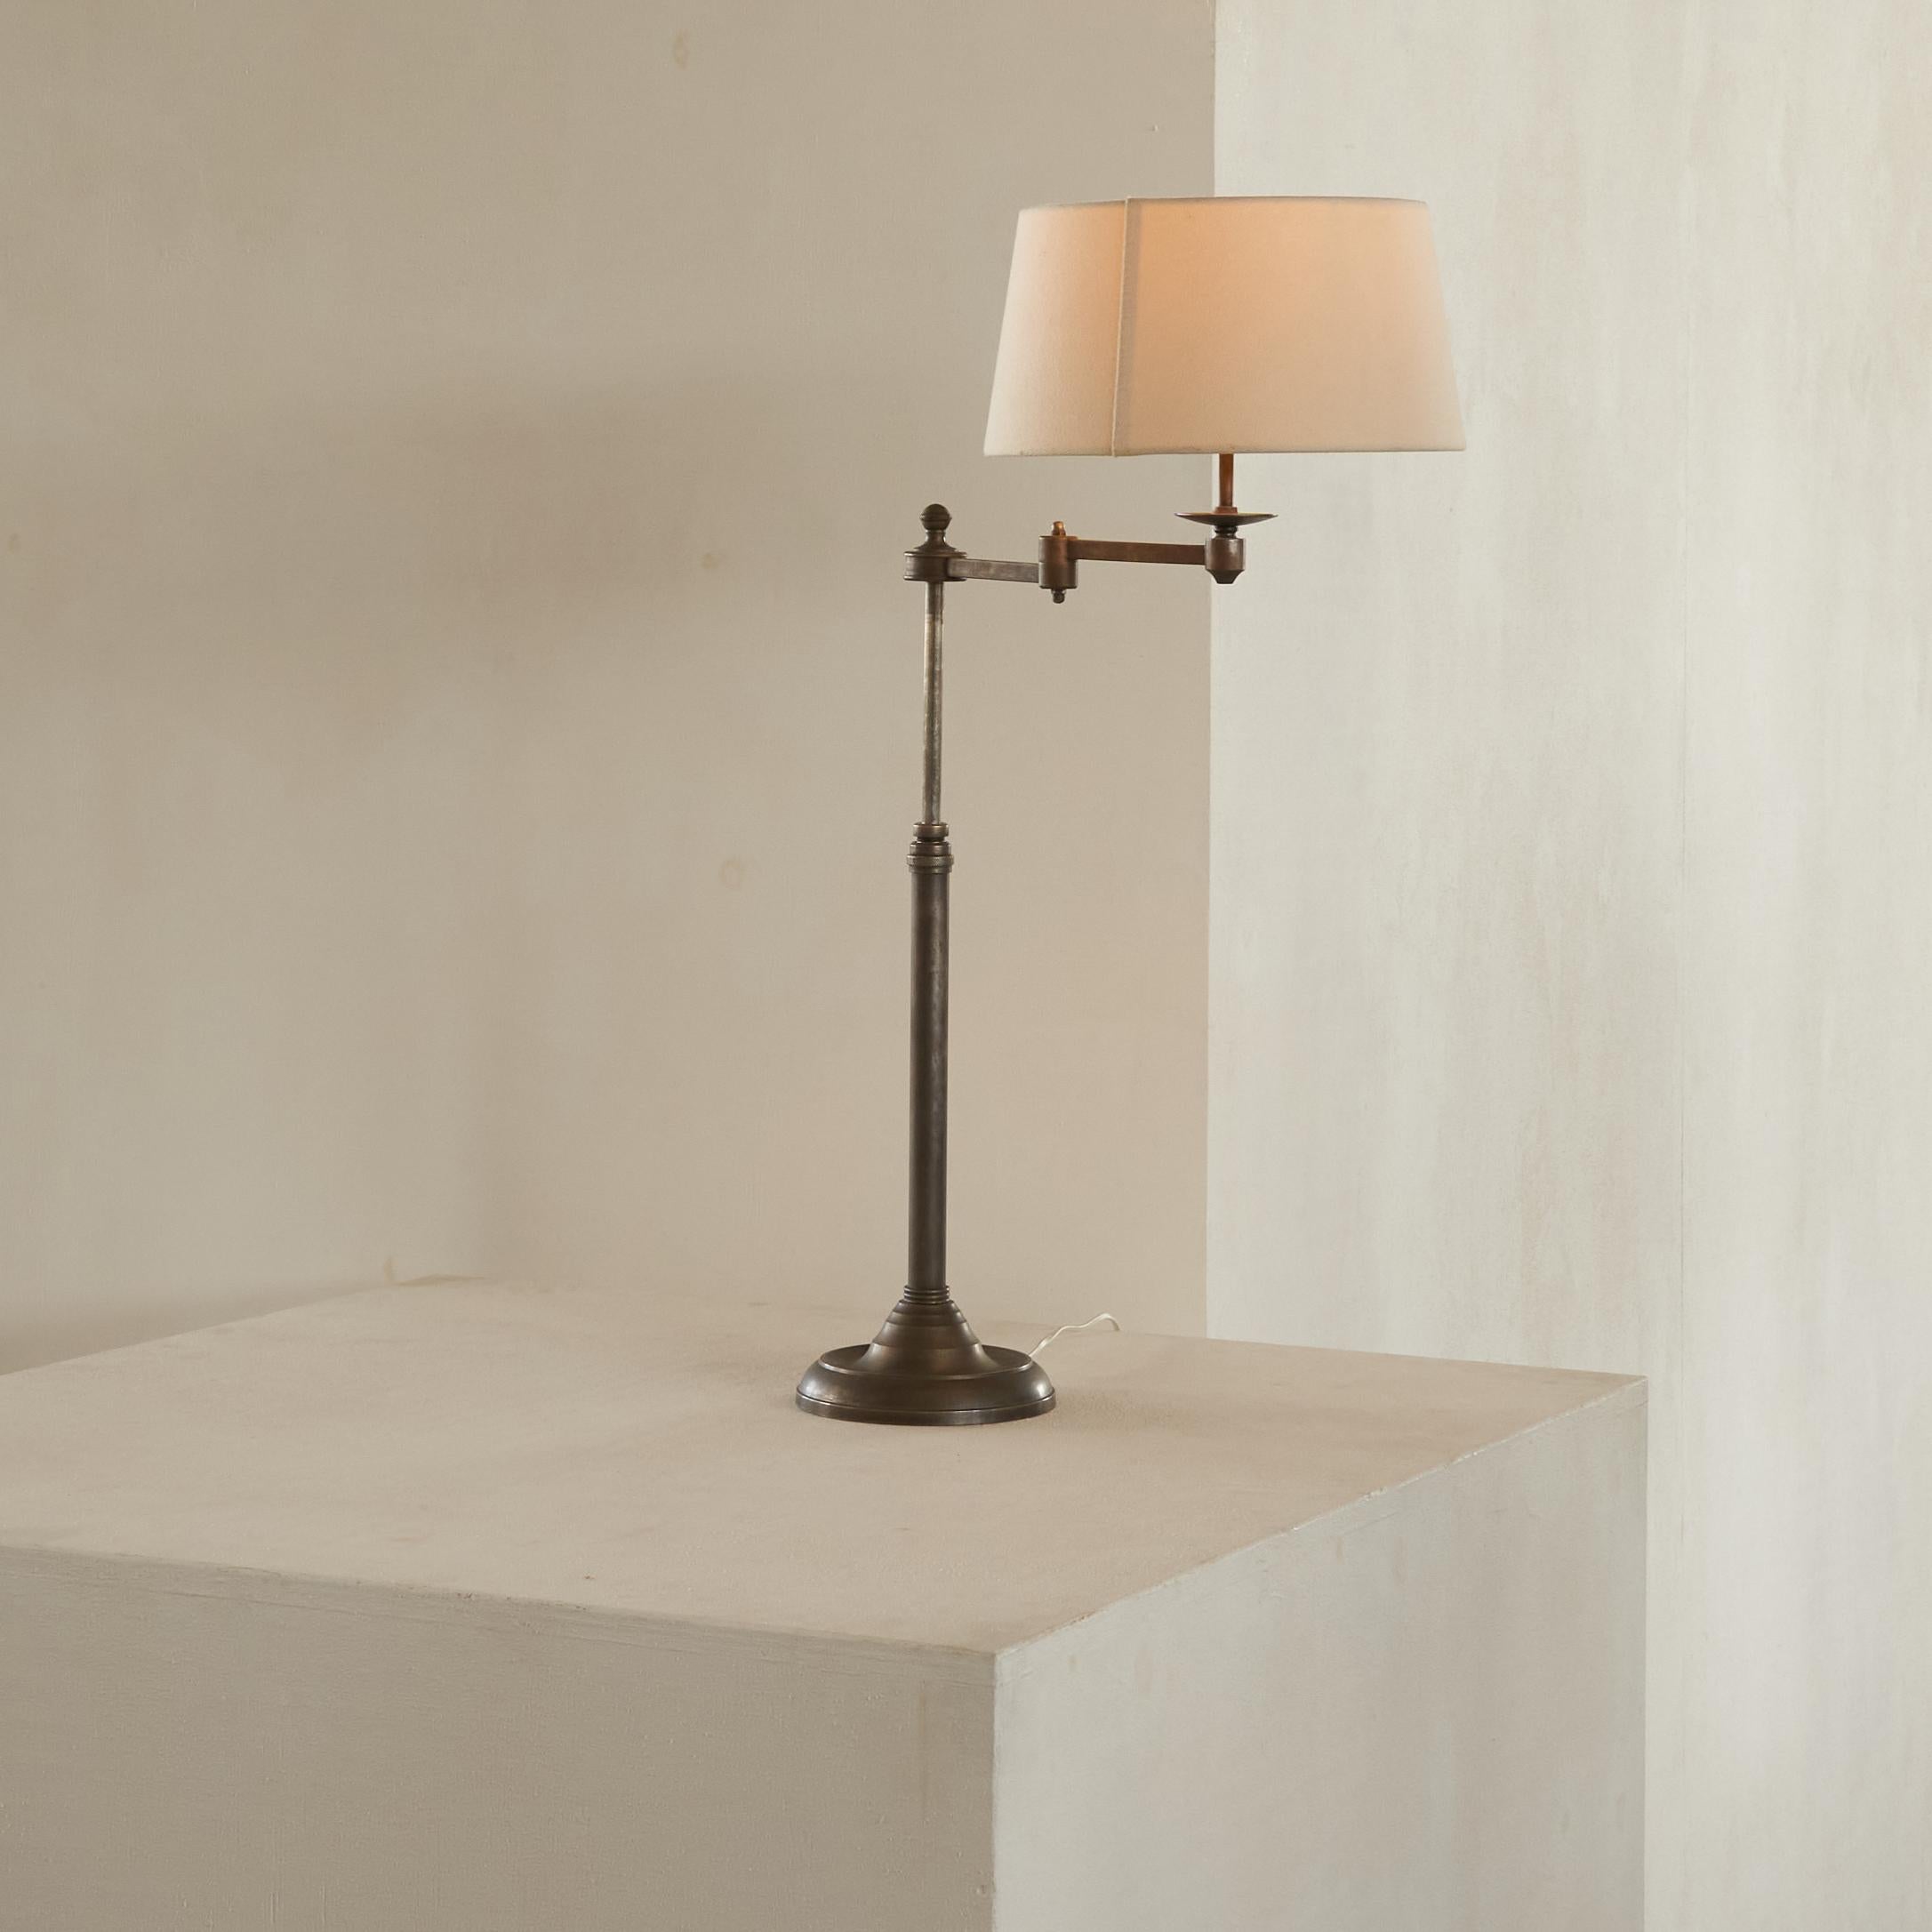 Italian Articulating Swivel Table Lamp in Metal 1970s For Sale 2